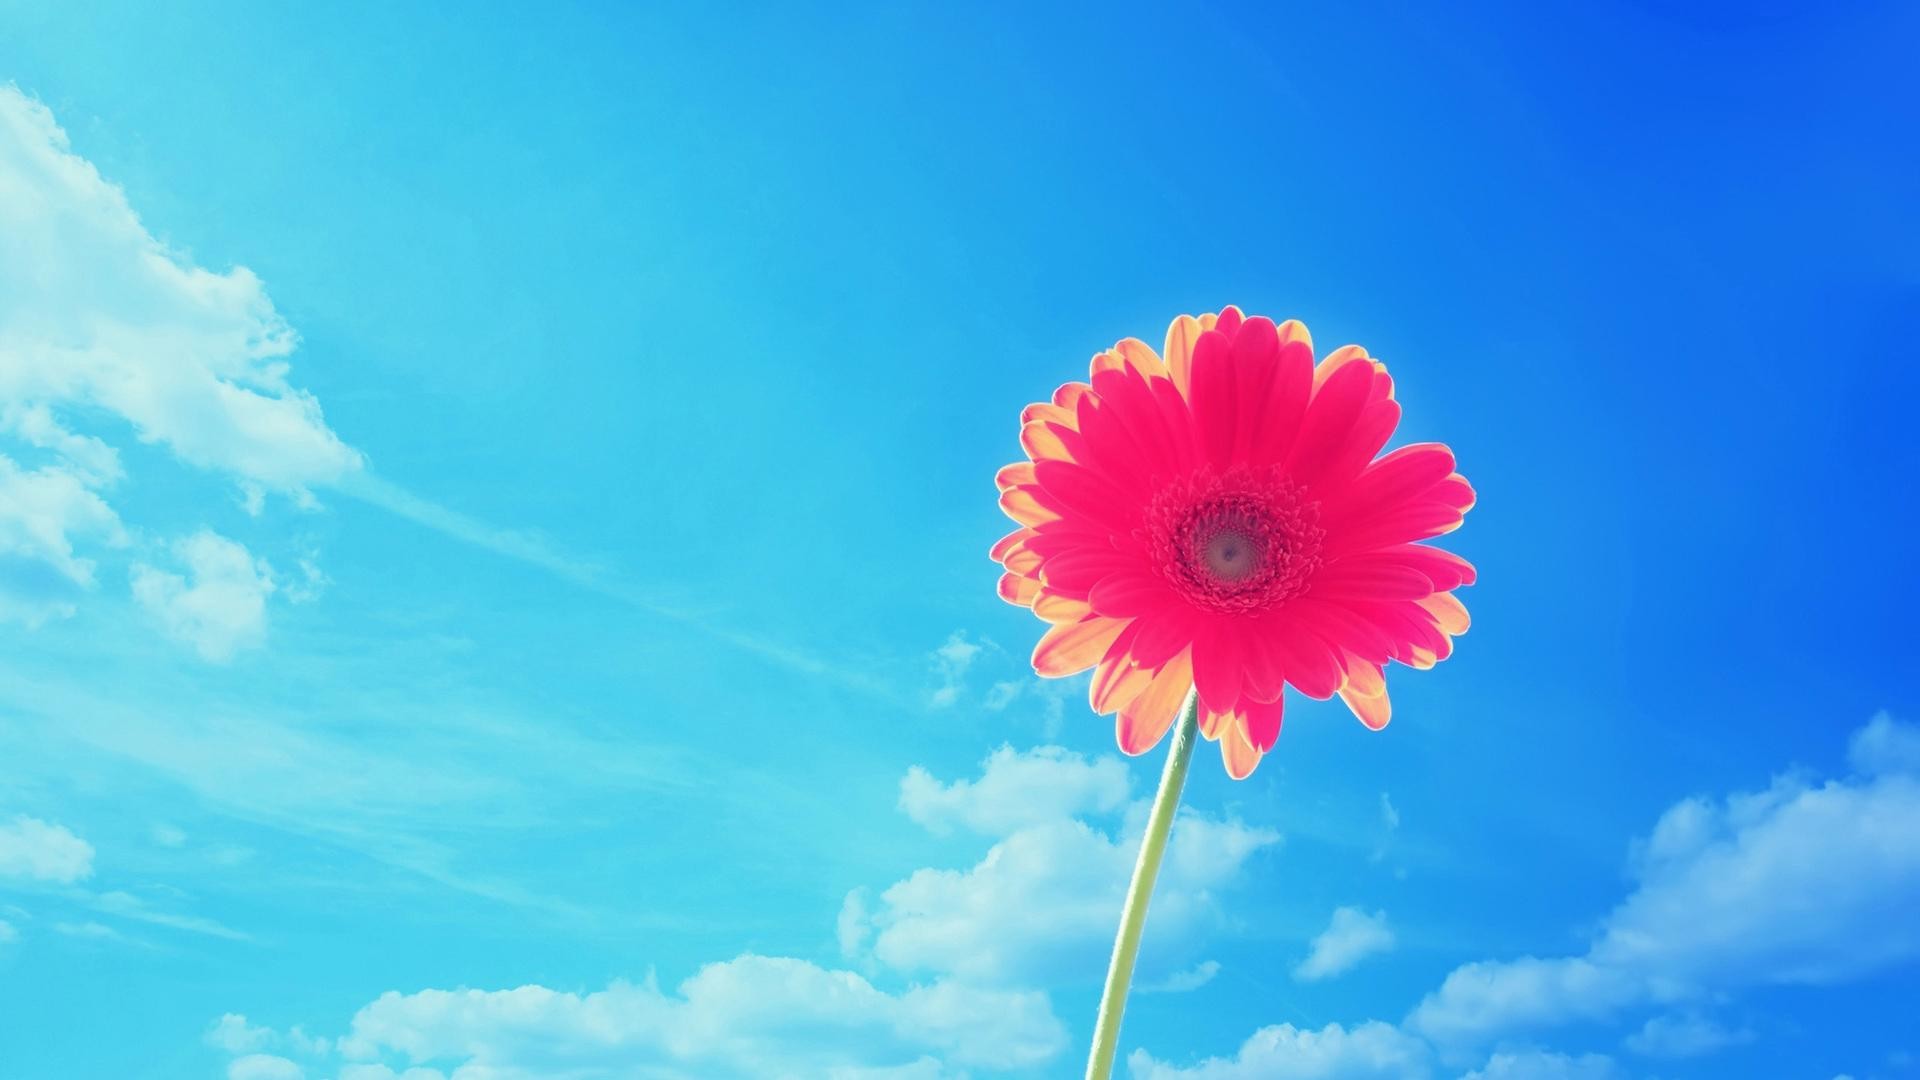 1920x1080 Sweet-Bright-Wallpaper-Stem-Image-Sky-Picture